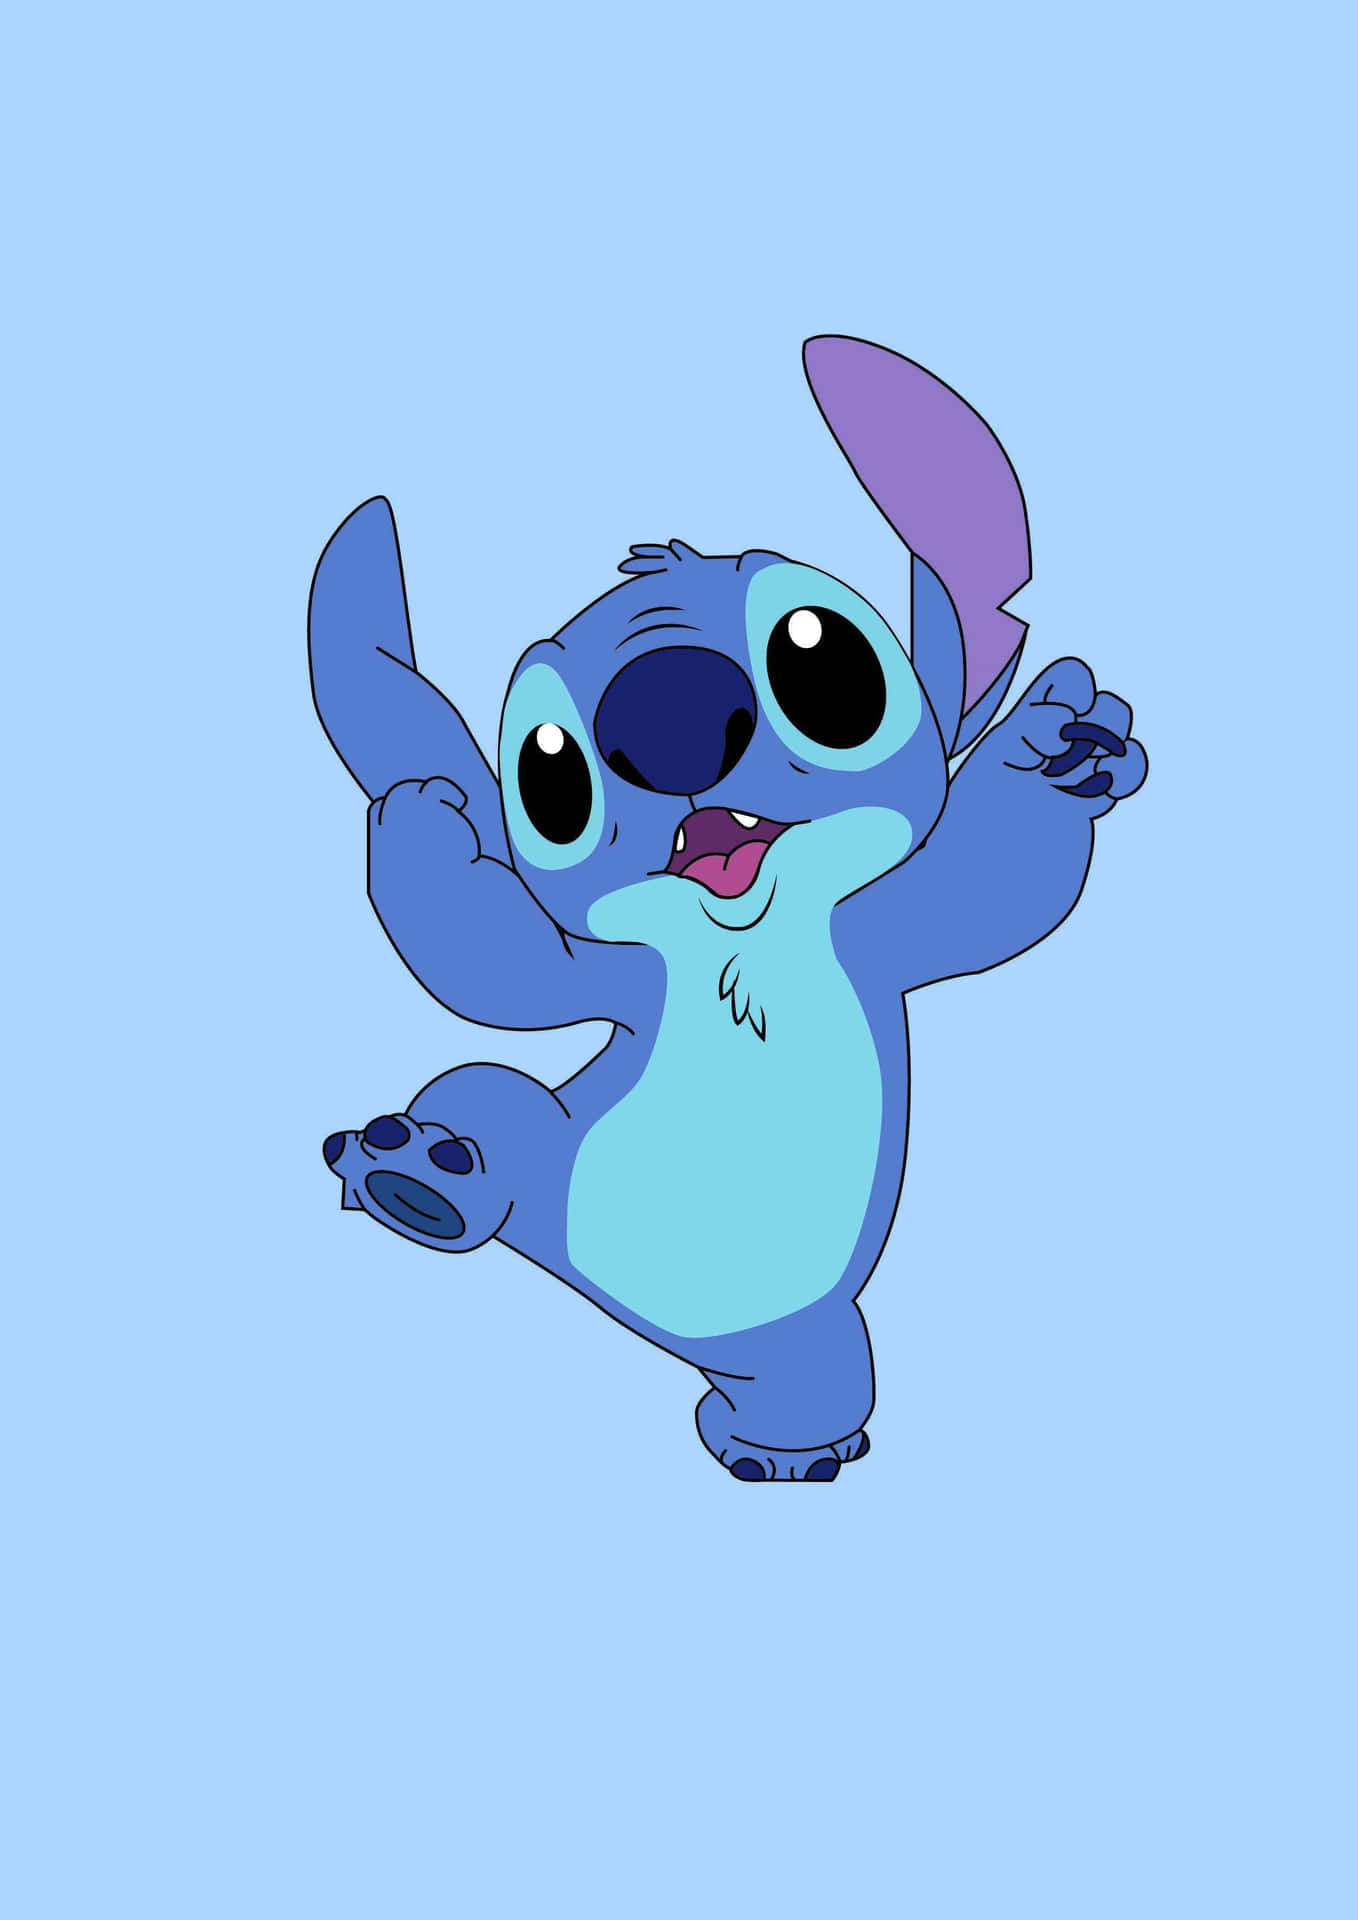 Be Charmed by the Magic of Stitch from Disney's Aesthetic! Wallpaper